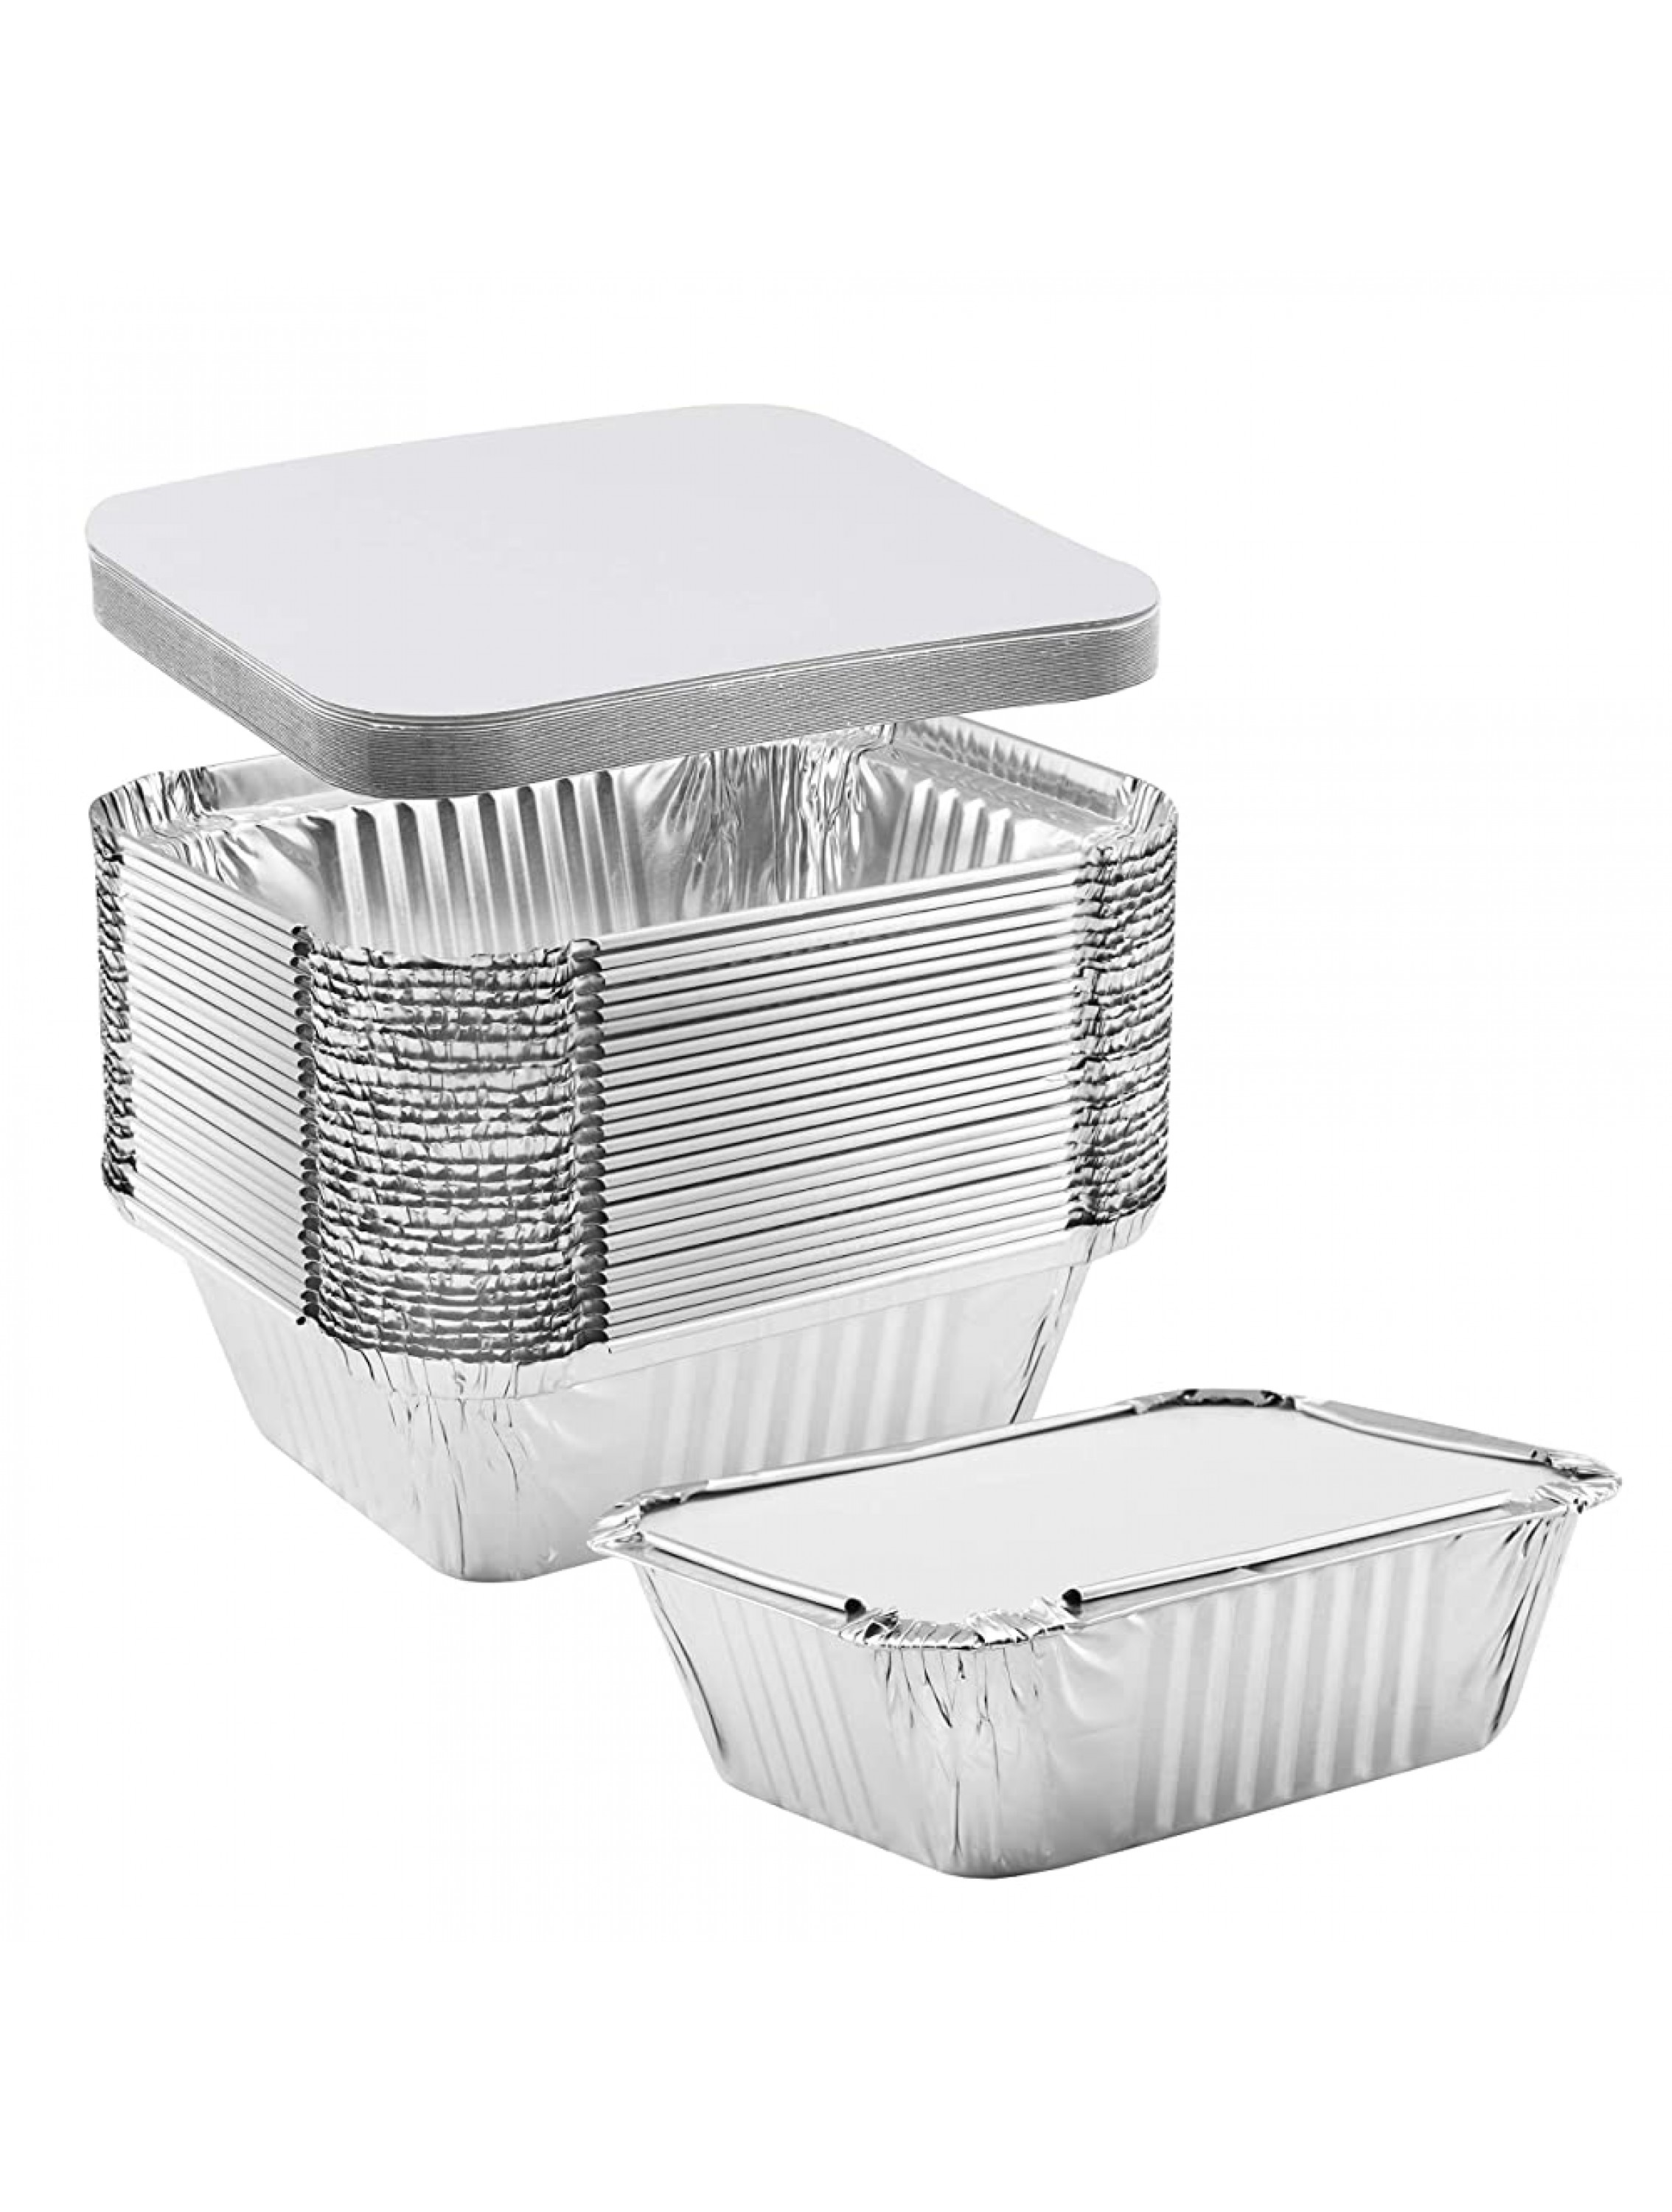 NYHI 50-Pack Extra Small Disposable Aluminum Oblong Foil Pans with Lid Covers Recyclable Tin Food Storage Tray for Cooking Baking Meal Prep Takeout 1 lb-5.75'' x 4.75'' x 1.75 - BB1PJDX3A